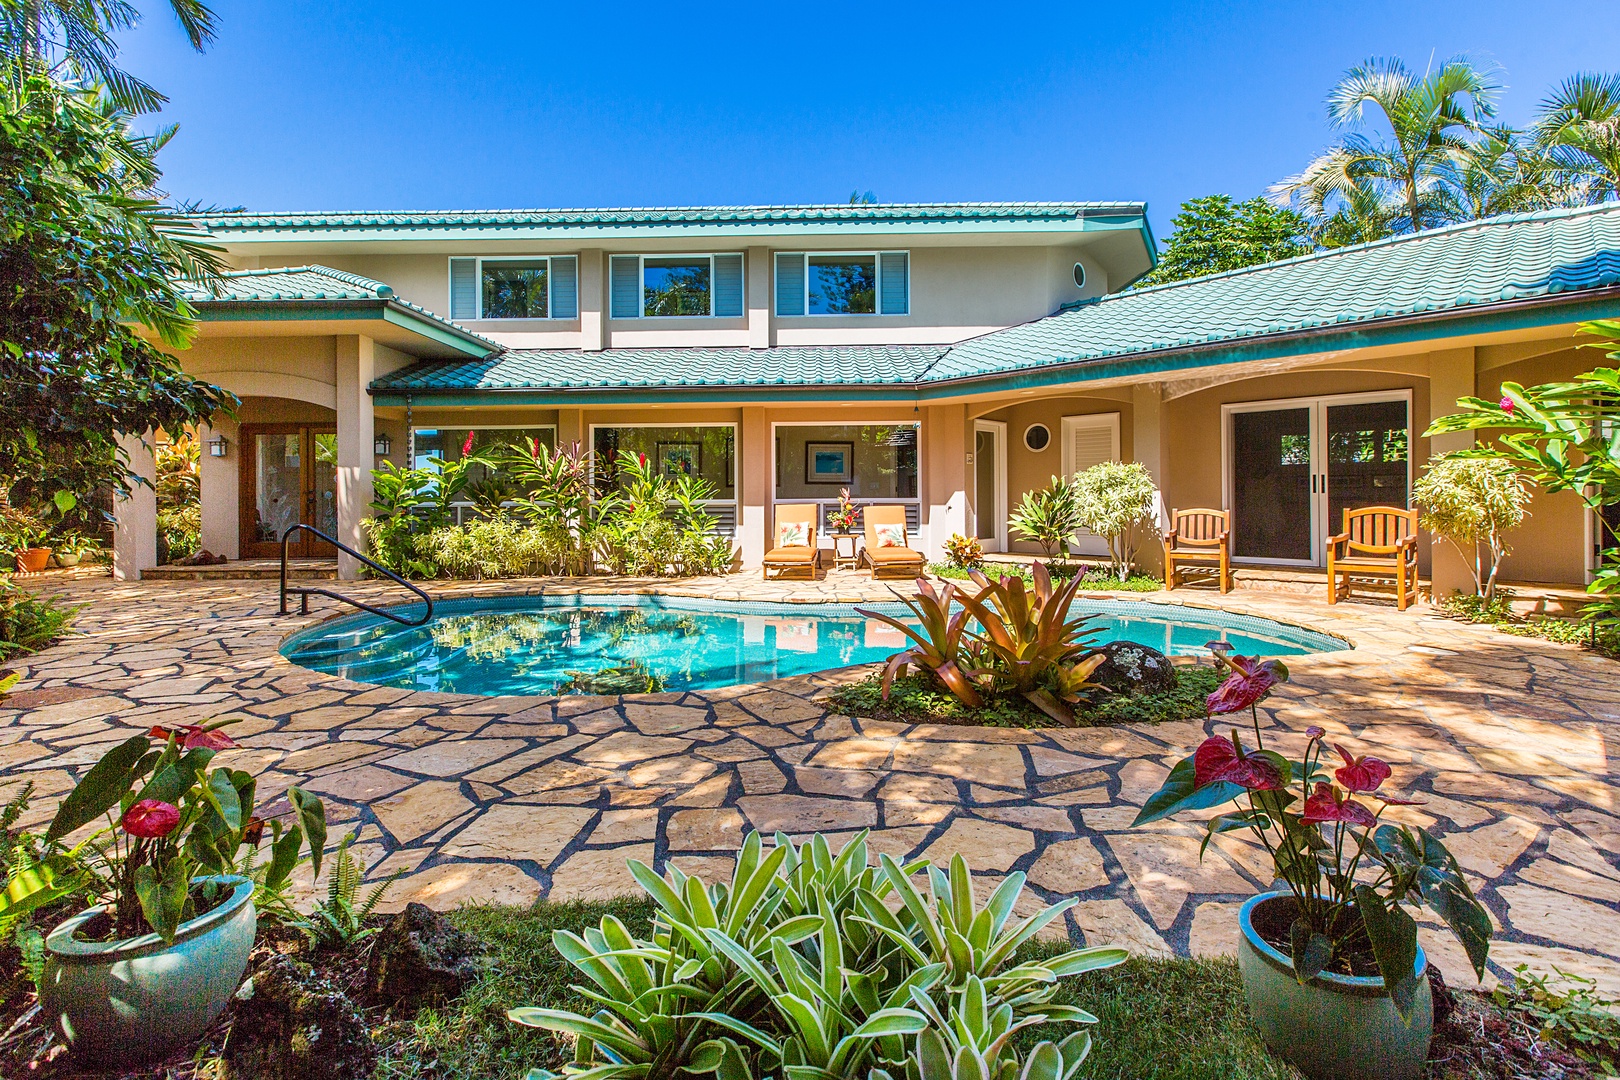 Princeville Vacation Rentals, Honu Awa - Private Pool and Manicured Grounds